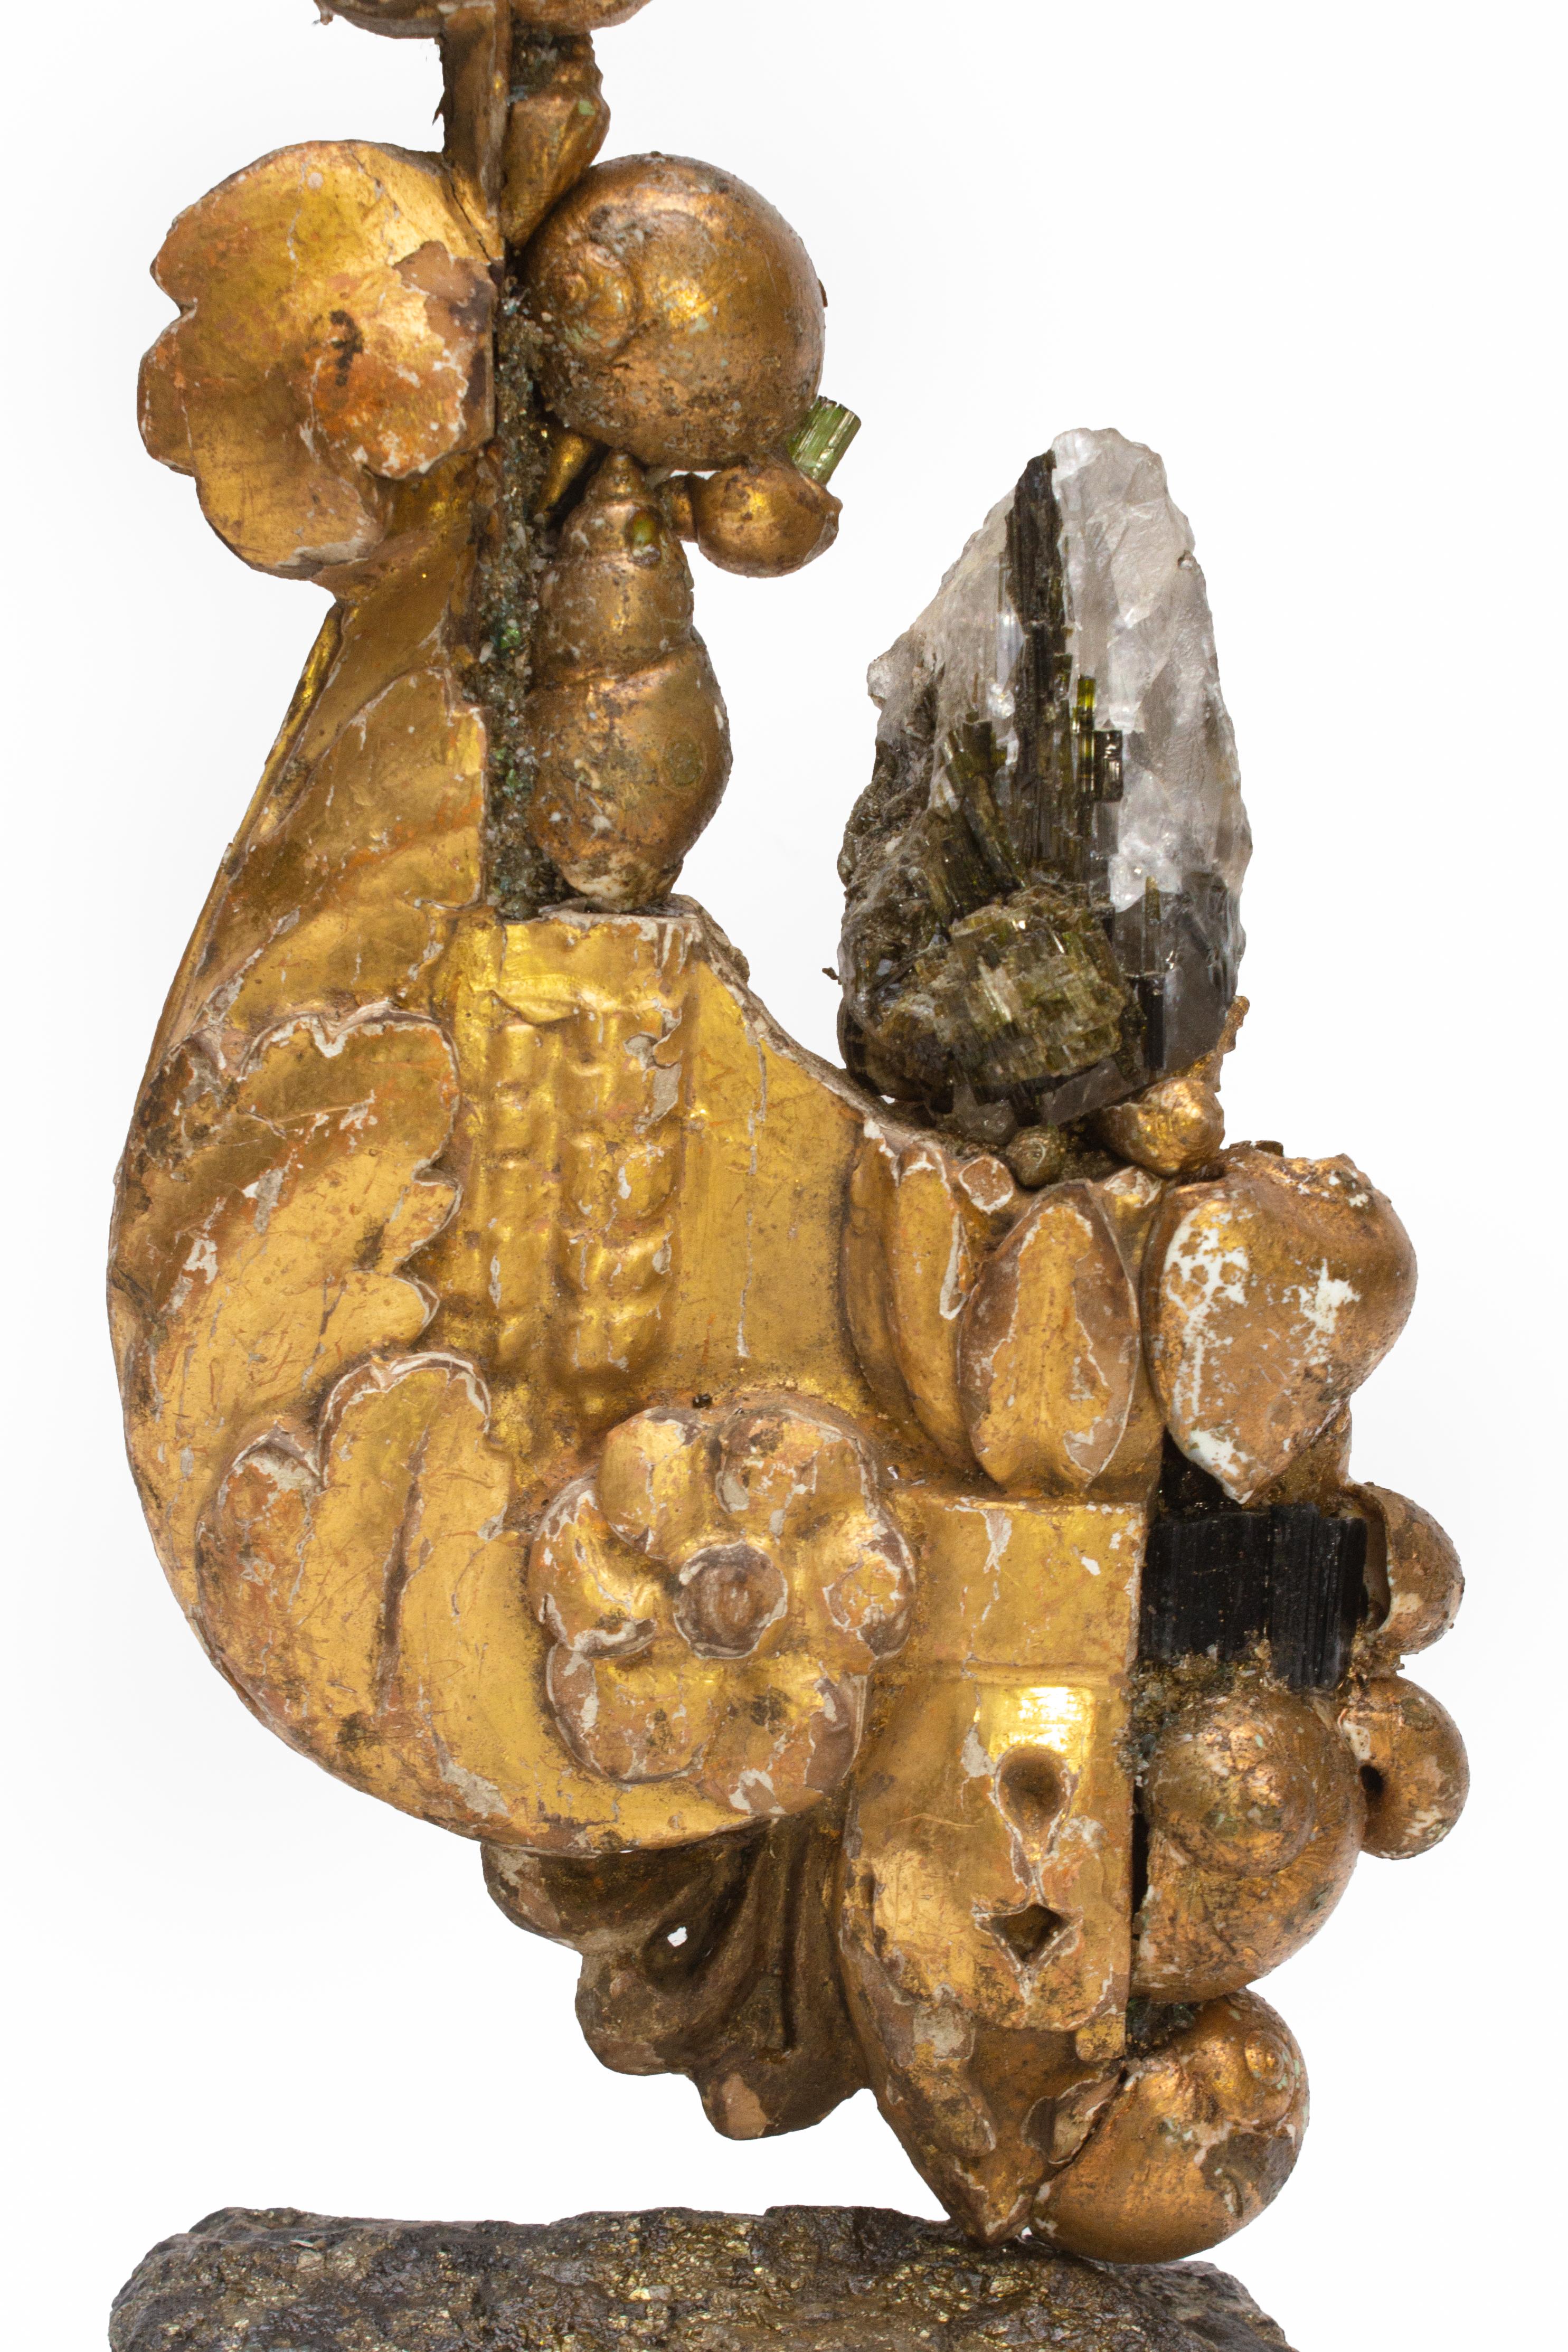 Rococo 18th Century Italian Fragment with Tourmaline and Gold Leaf Shells on Pyrite